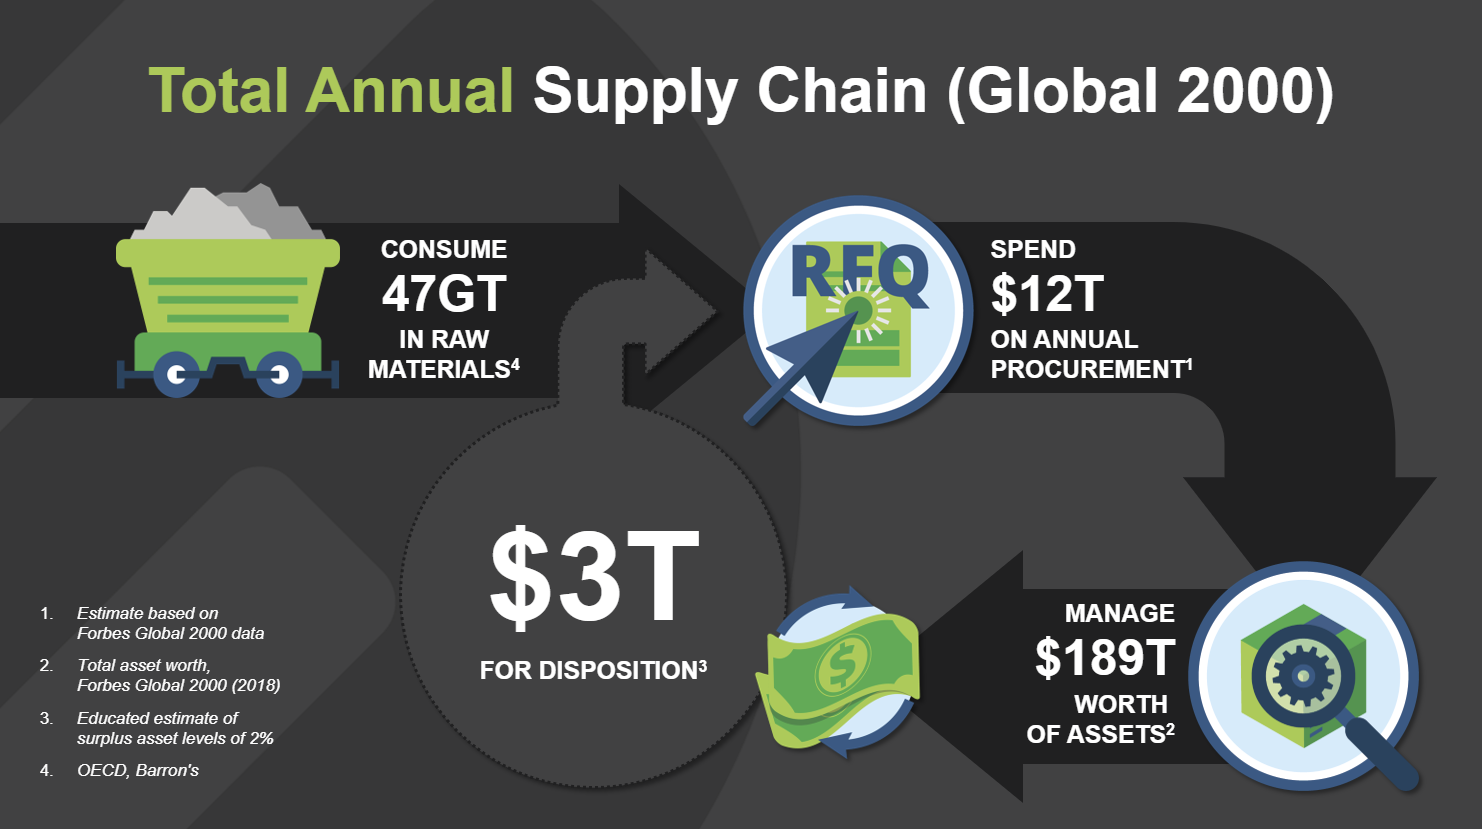 total supply chain annual asset spend and holdings of the Global 2000